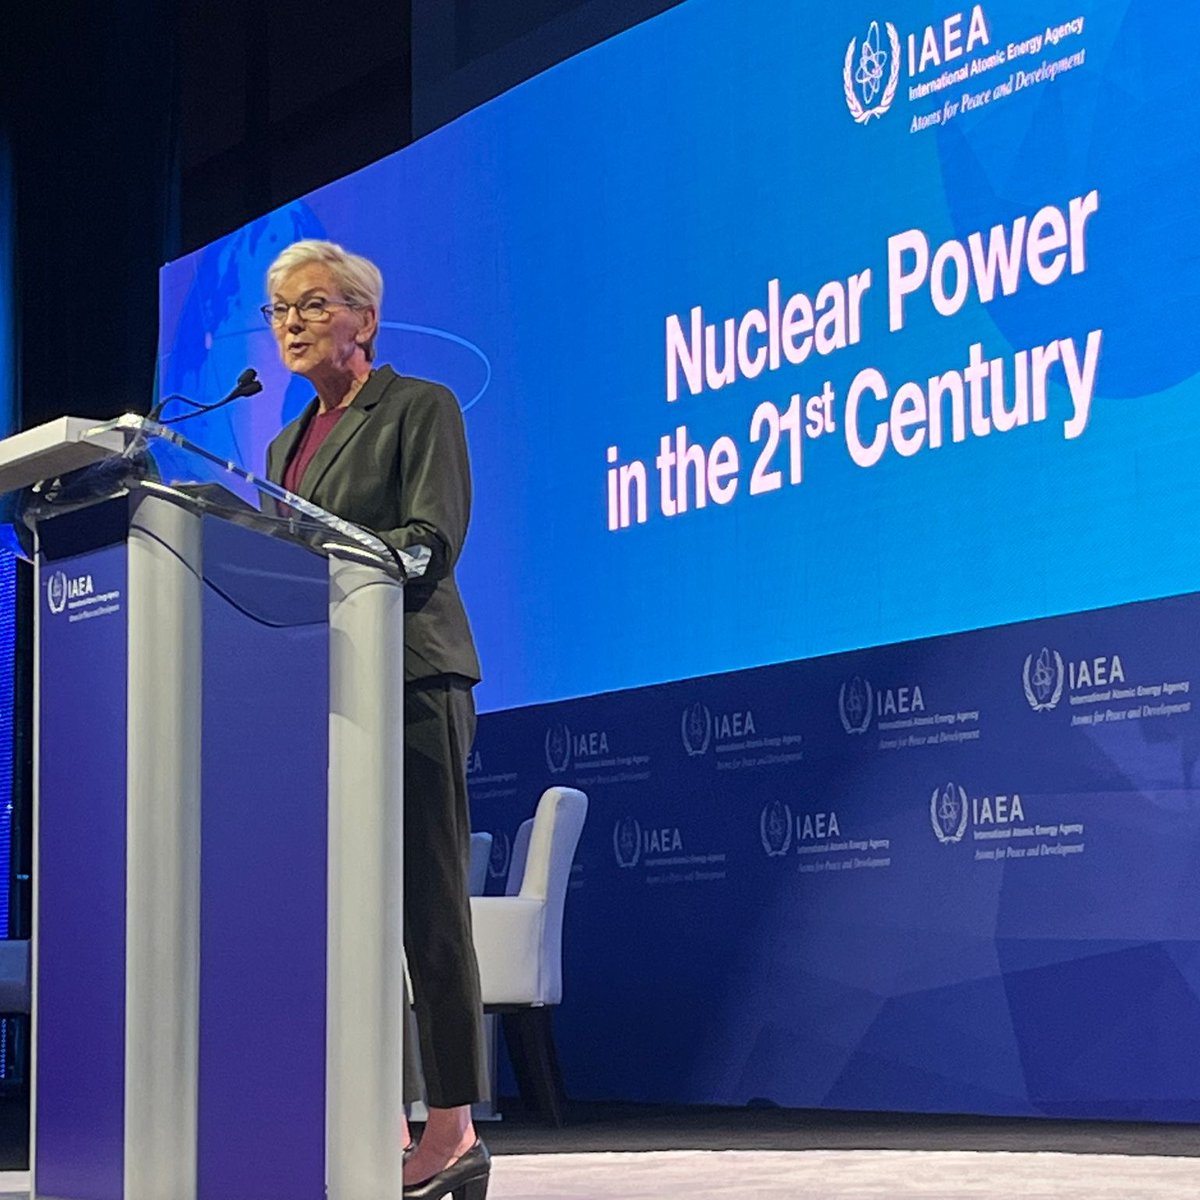 .@IAEAorg #PoweredByNuclear Ministerial Conference on Nuclear Power has kicked off. It was a pleasure to, together with Conference President @ENERGY @SecGranholm, welcome 700+ participants from all over the 🌍 who will discuss nuclear’s role in fighting energy & climate crises.